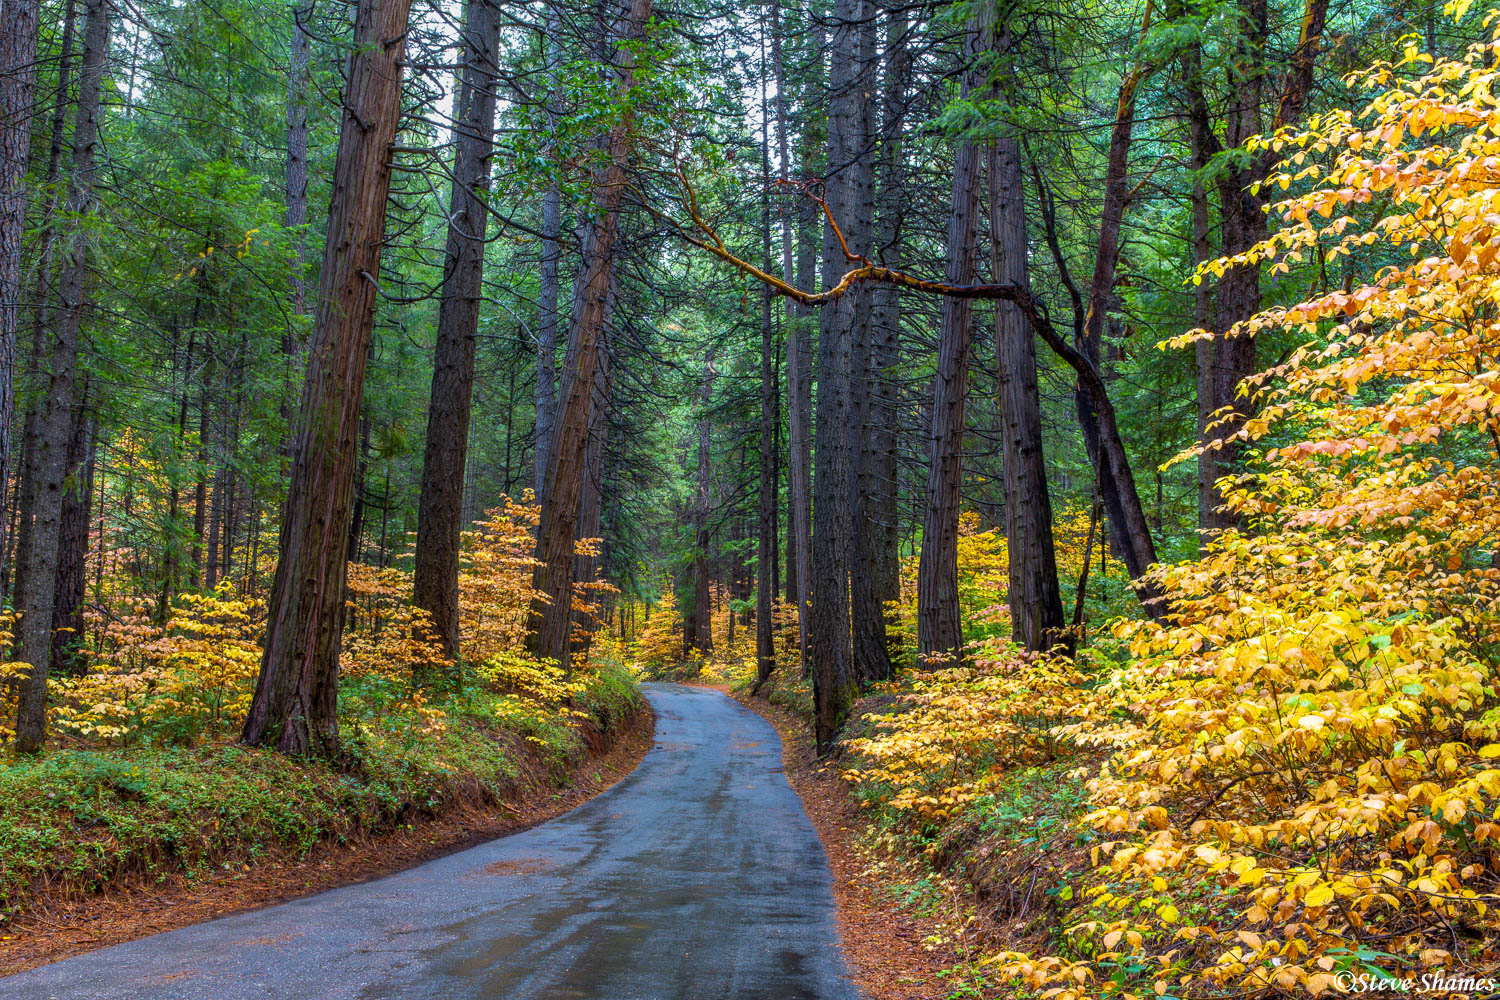 A road through the colorful woods. This is the time of year where roads can really enhance a scene.